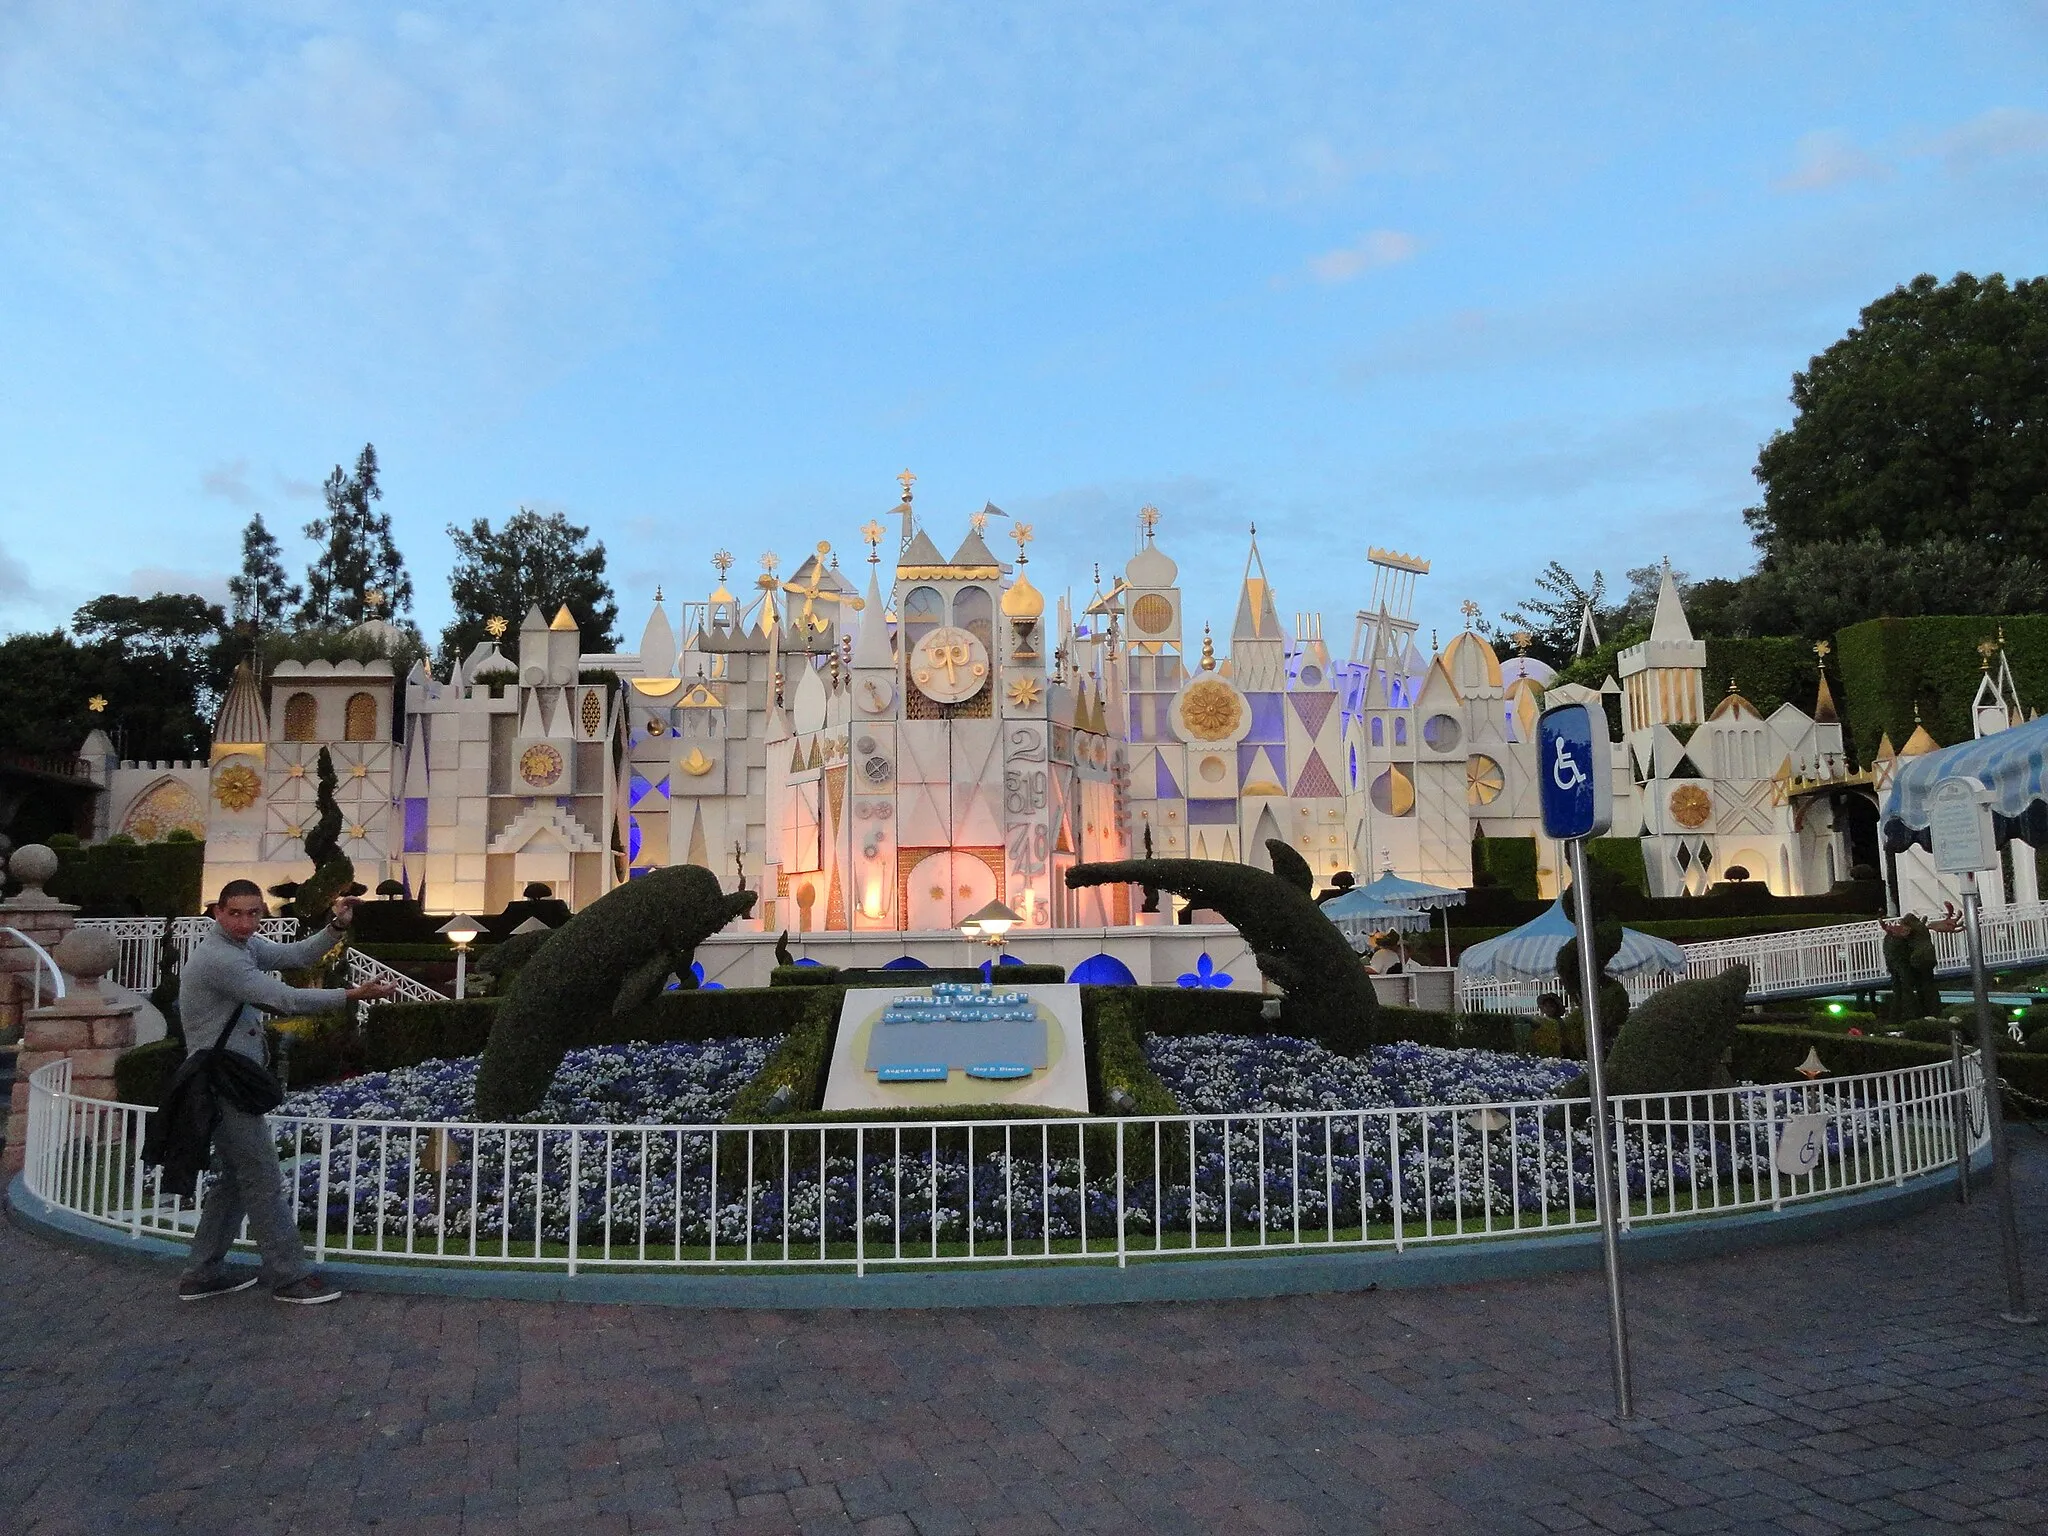 Photo showing: Visit my travel blog at Xcellent Trip for great travel tips about some of the most popular world destinations.

This is picture from Disneyland park in Anaheim, Los Angeles (LA), California (CA) United States of America (USA).